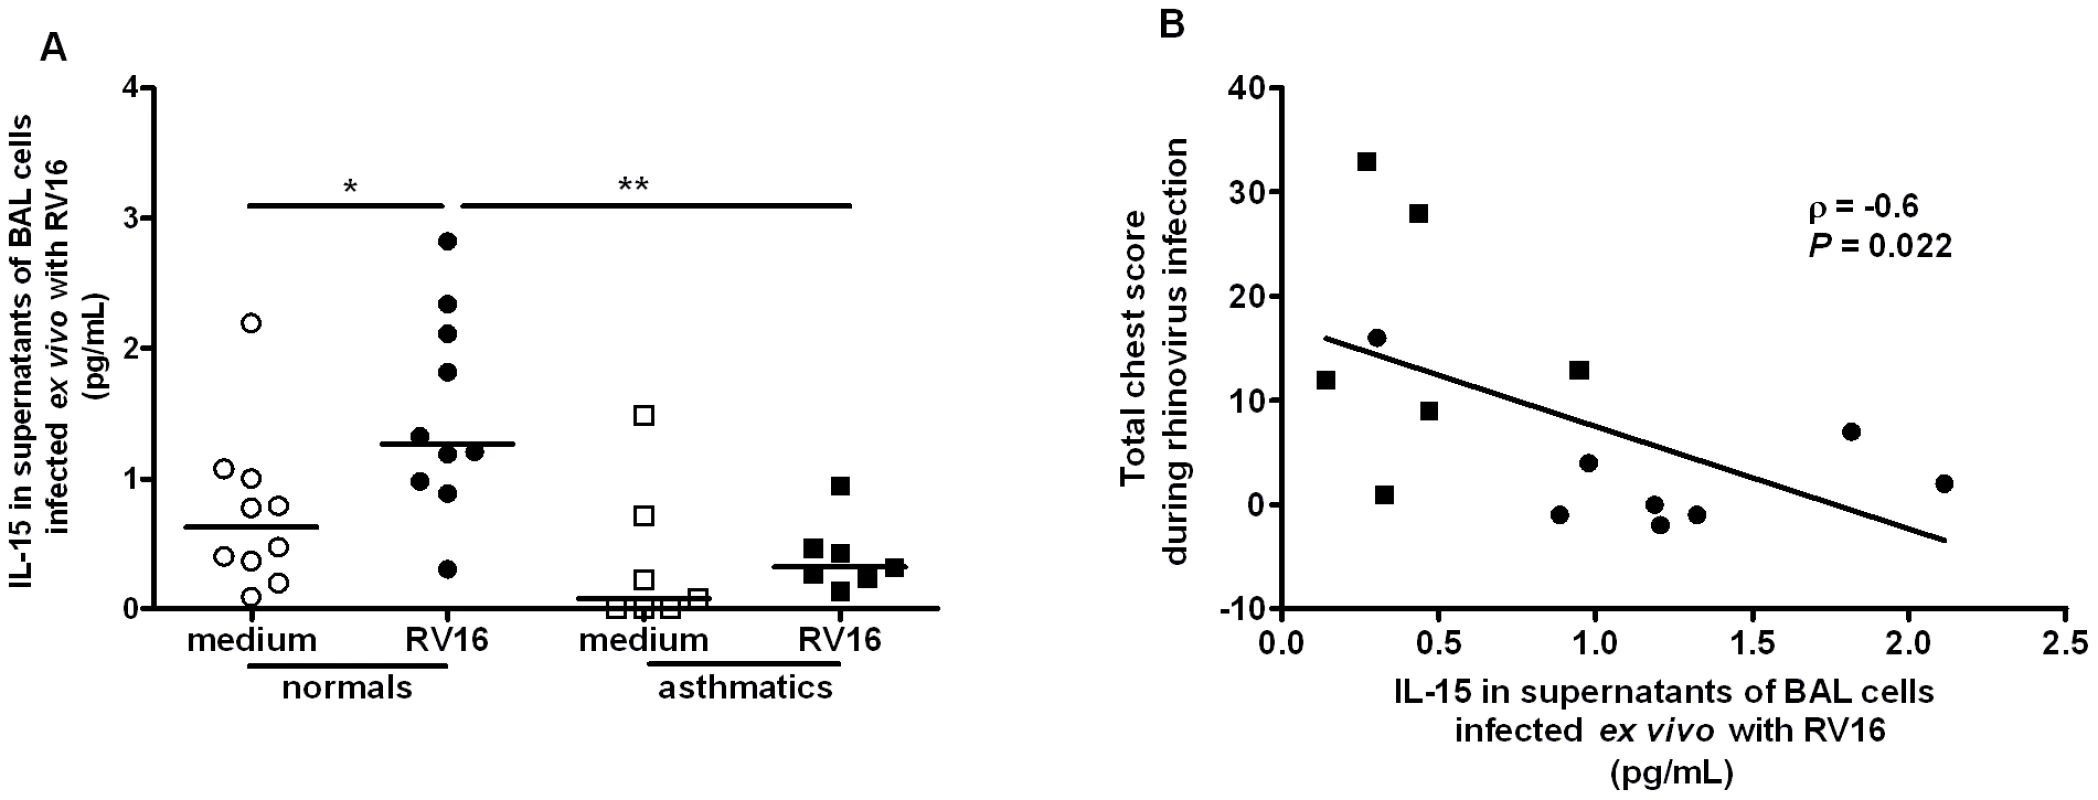 Rhinovirus induction of IL-15 release from alveolar macrophages; induction is inversely related to severity of lower respiratory symptoms following rhinovirus infection <i>in vivo.</i>